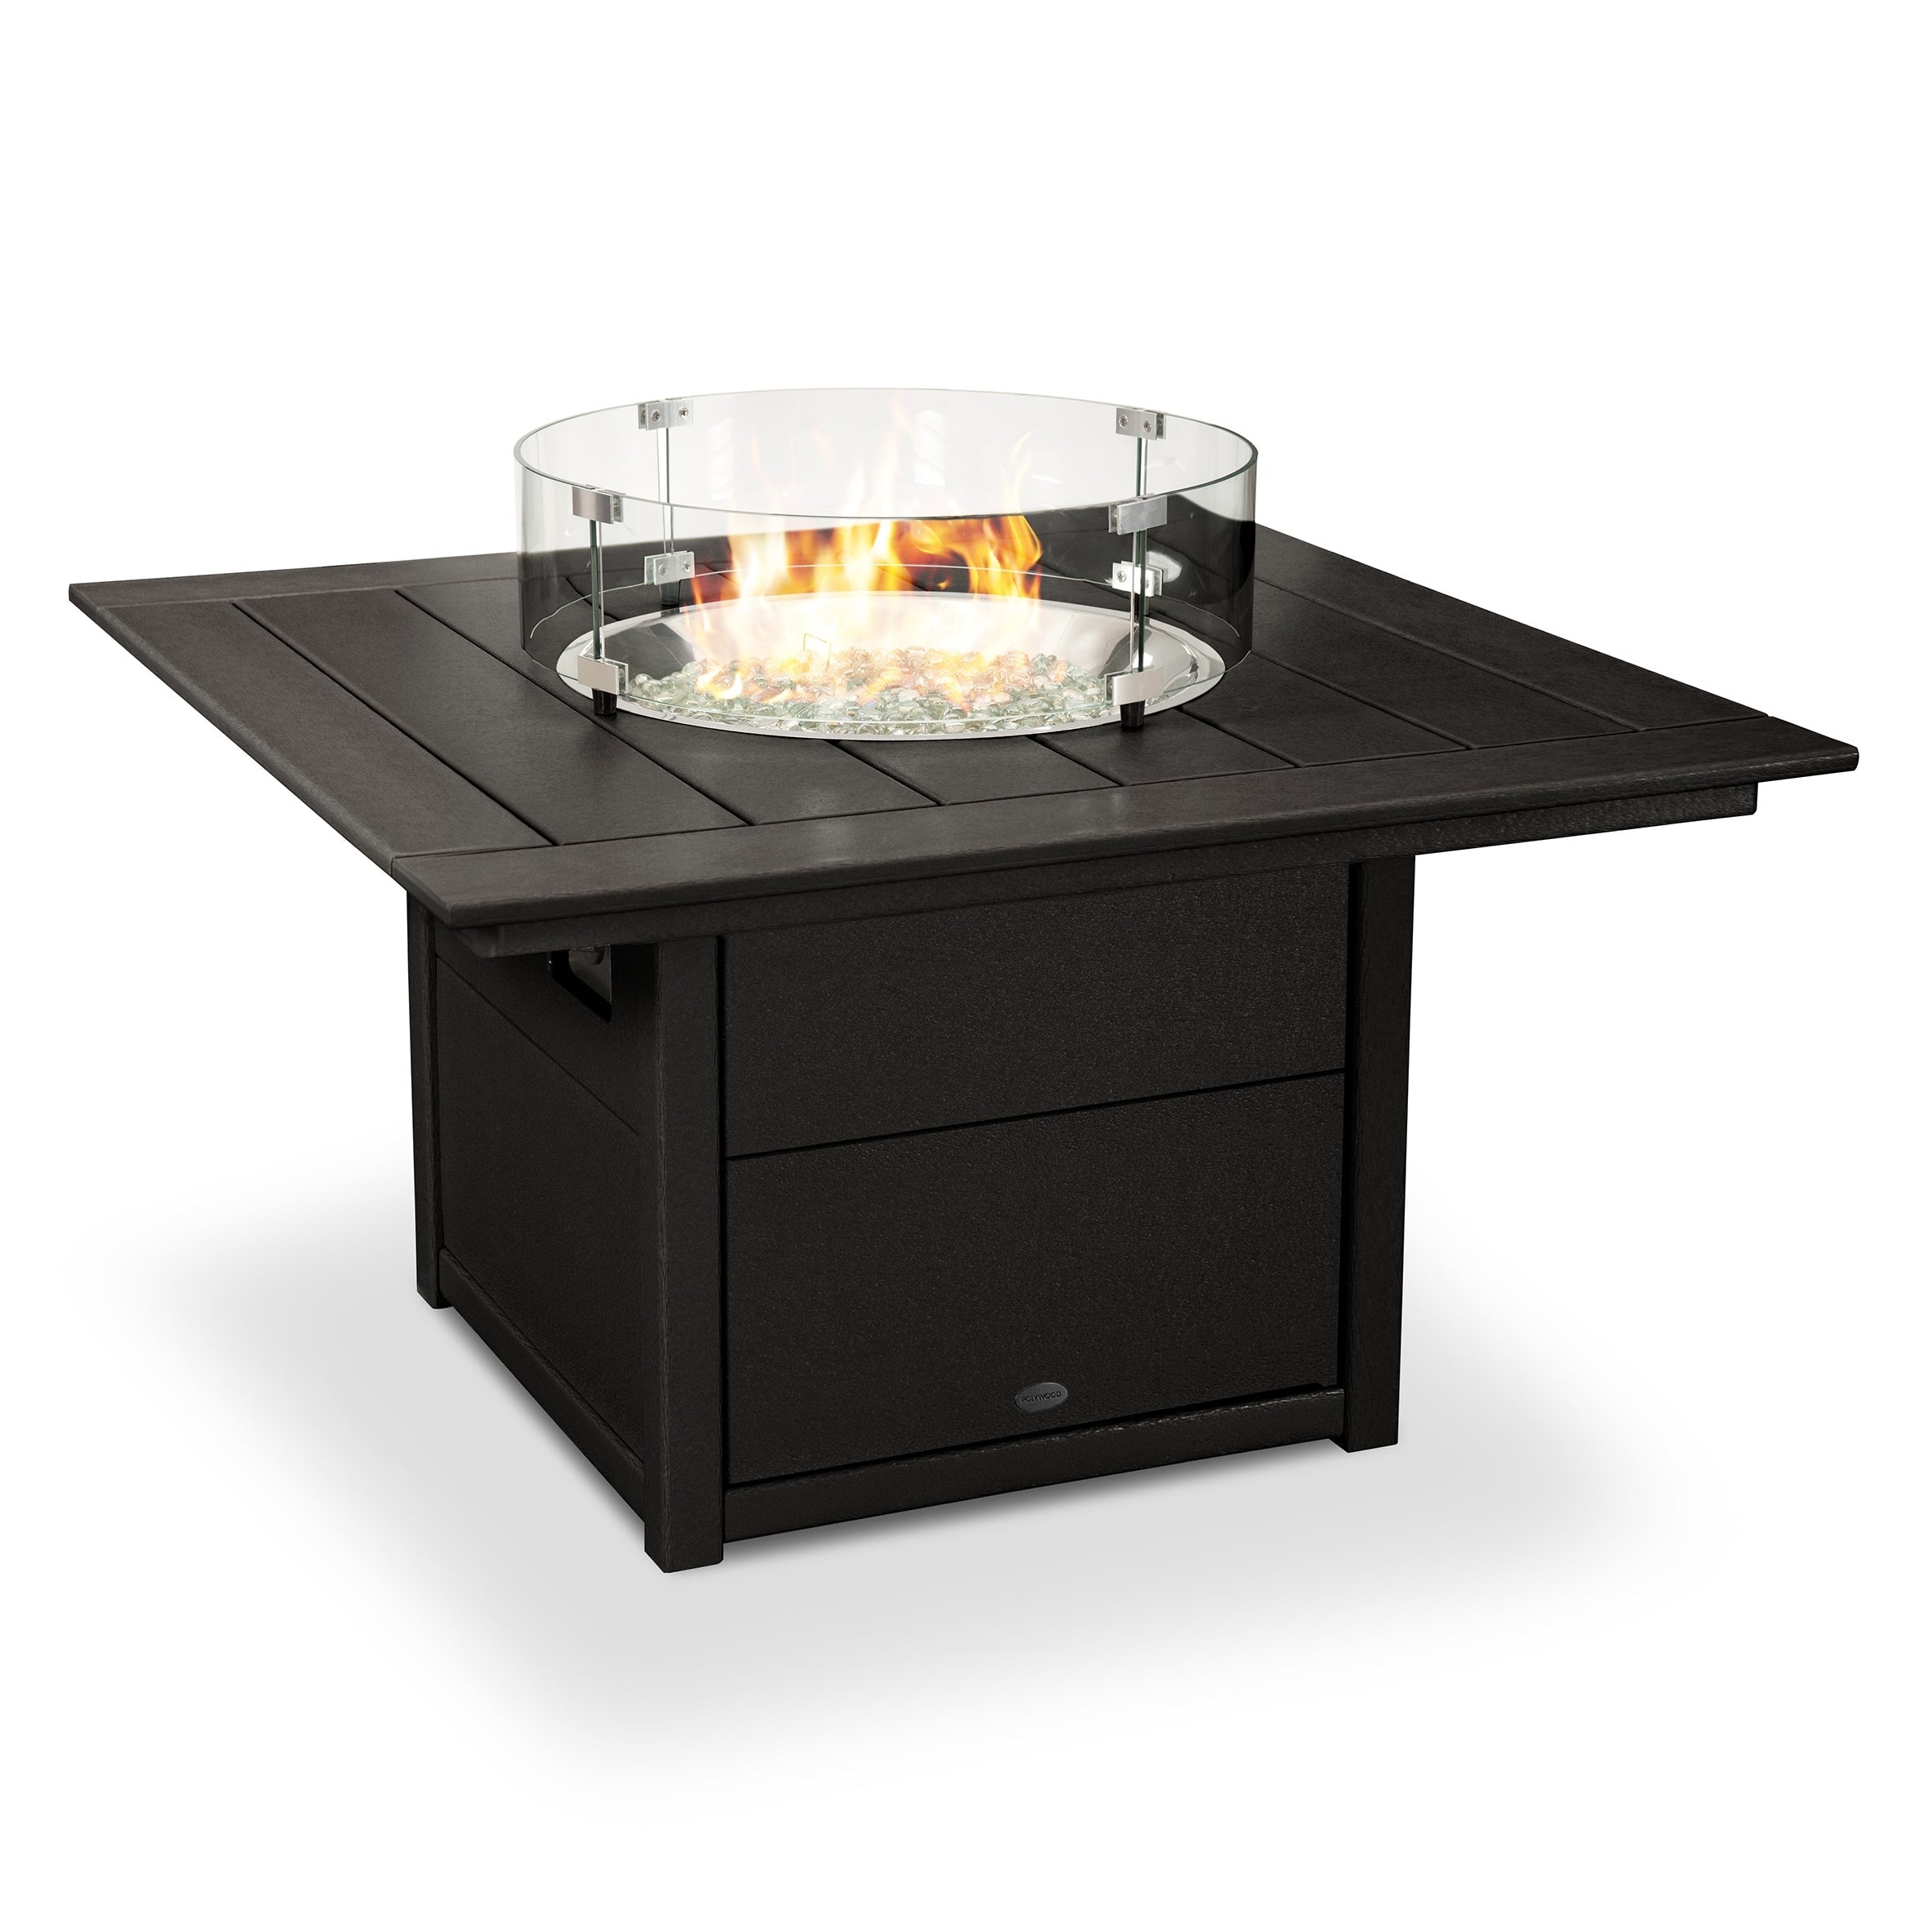 POLYWOOD Fire Table with Square 42 inch Top Fireplaces Black 12033411